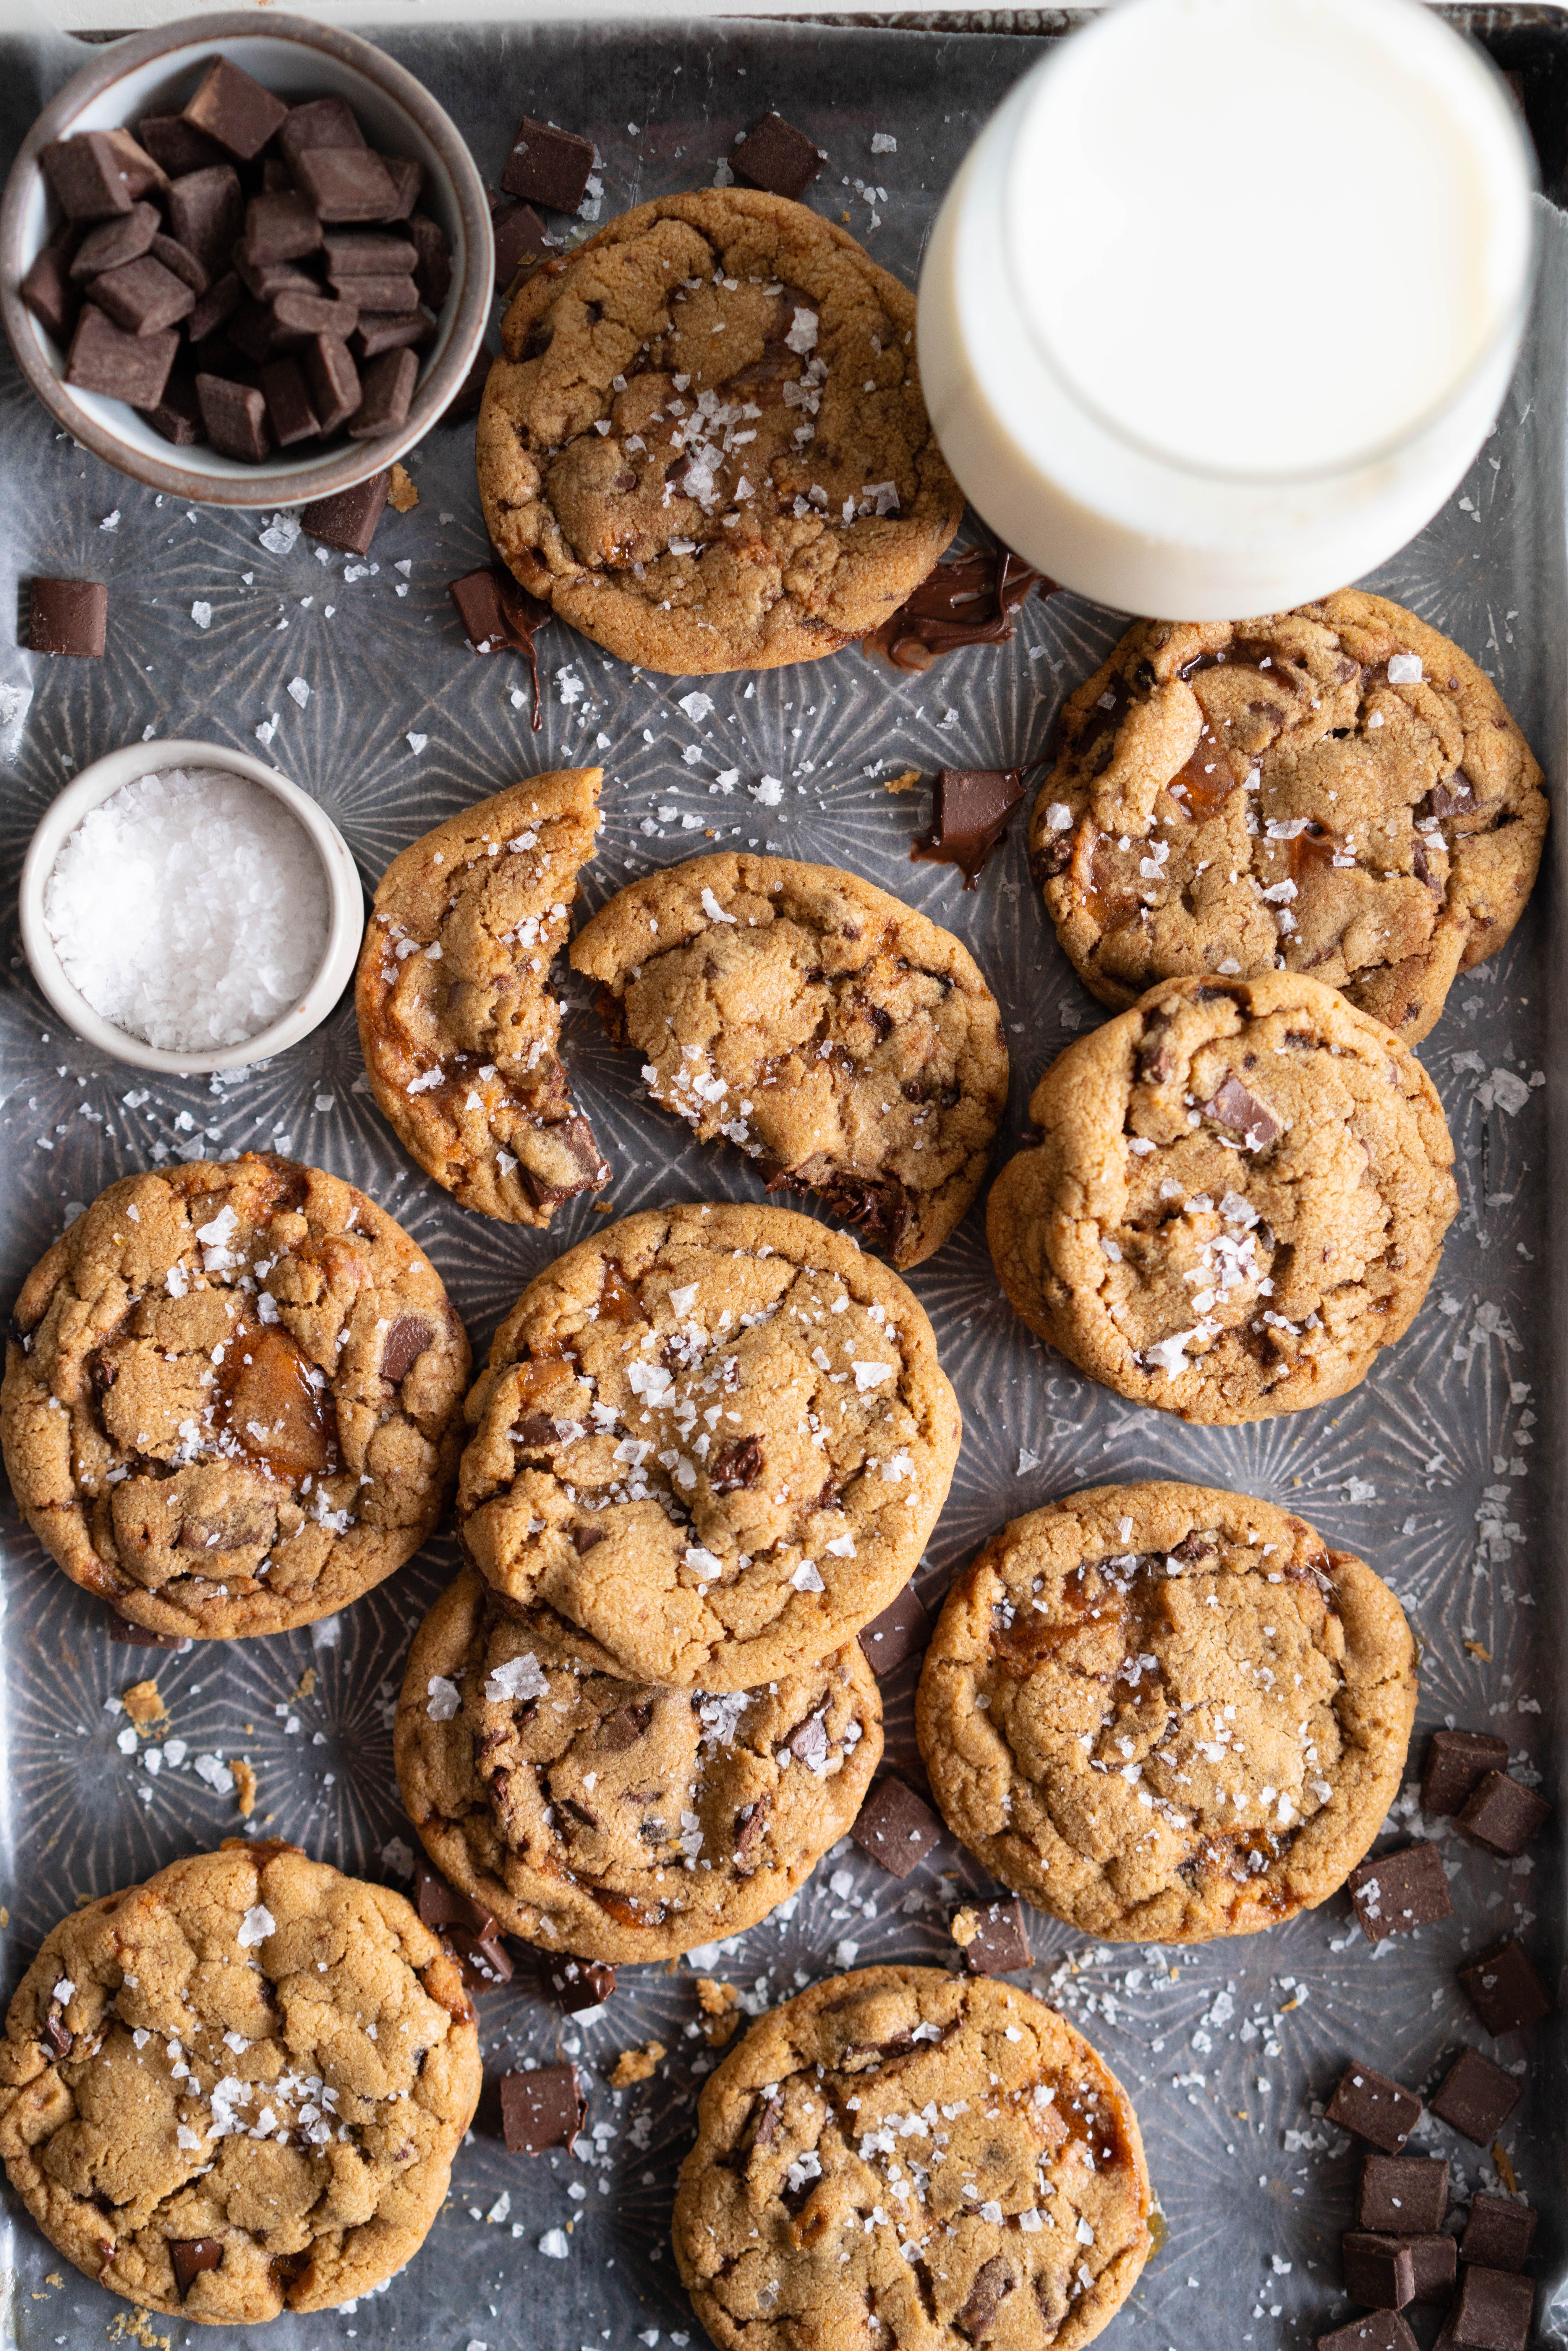 Brown Butter Salted Caramel Chocolate Chunk Cookies recipe by Erin